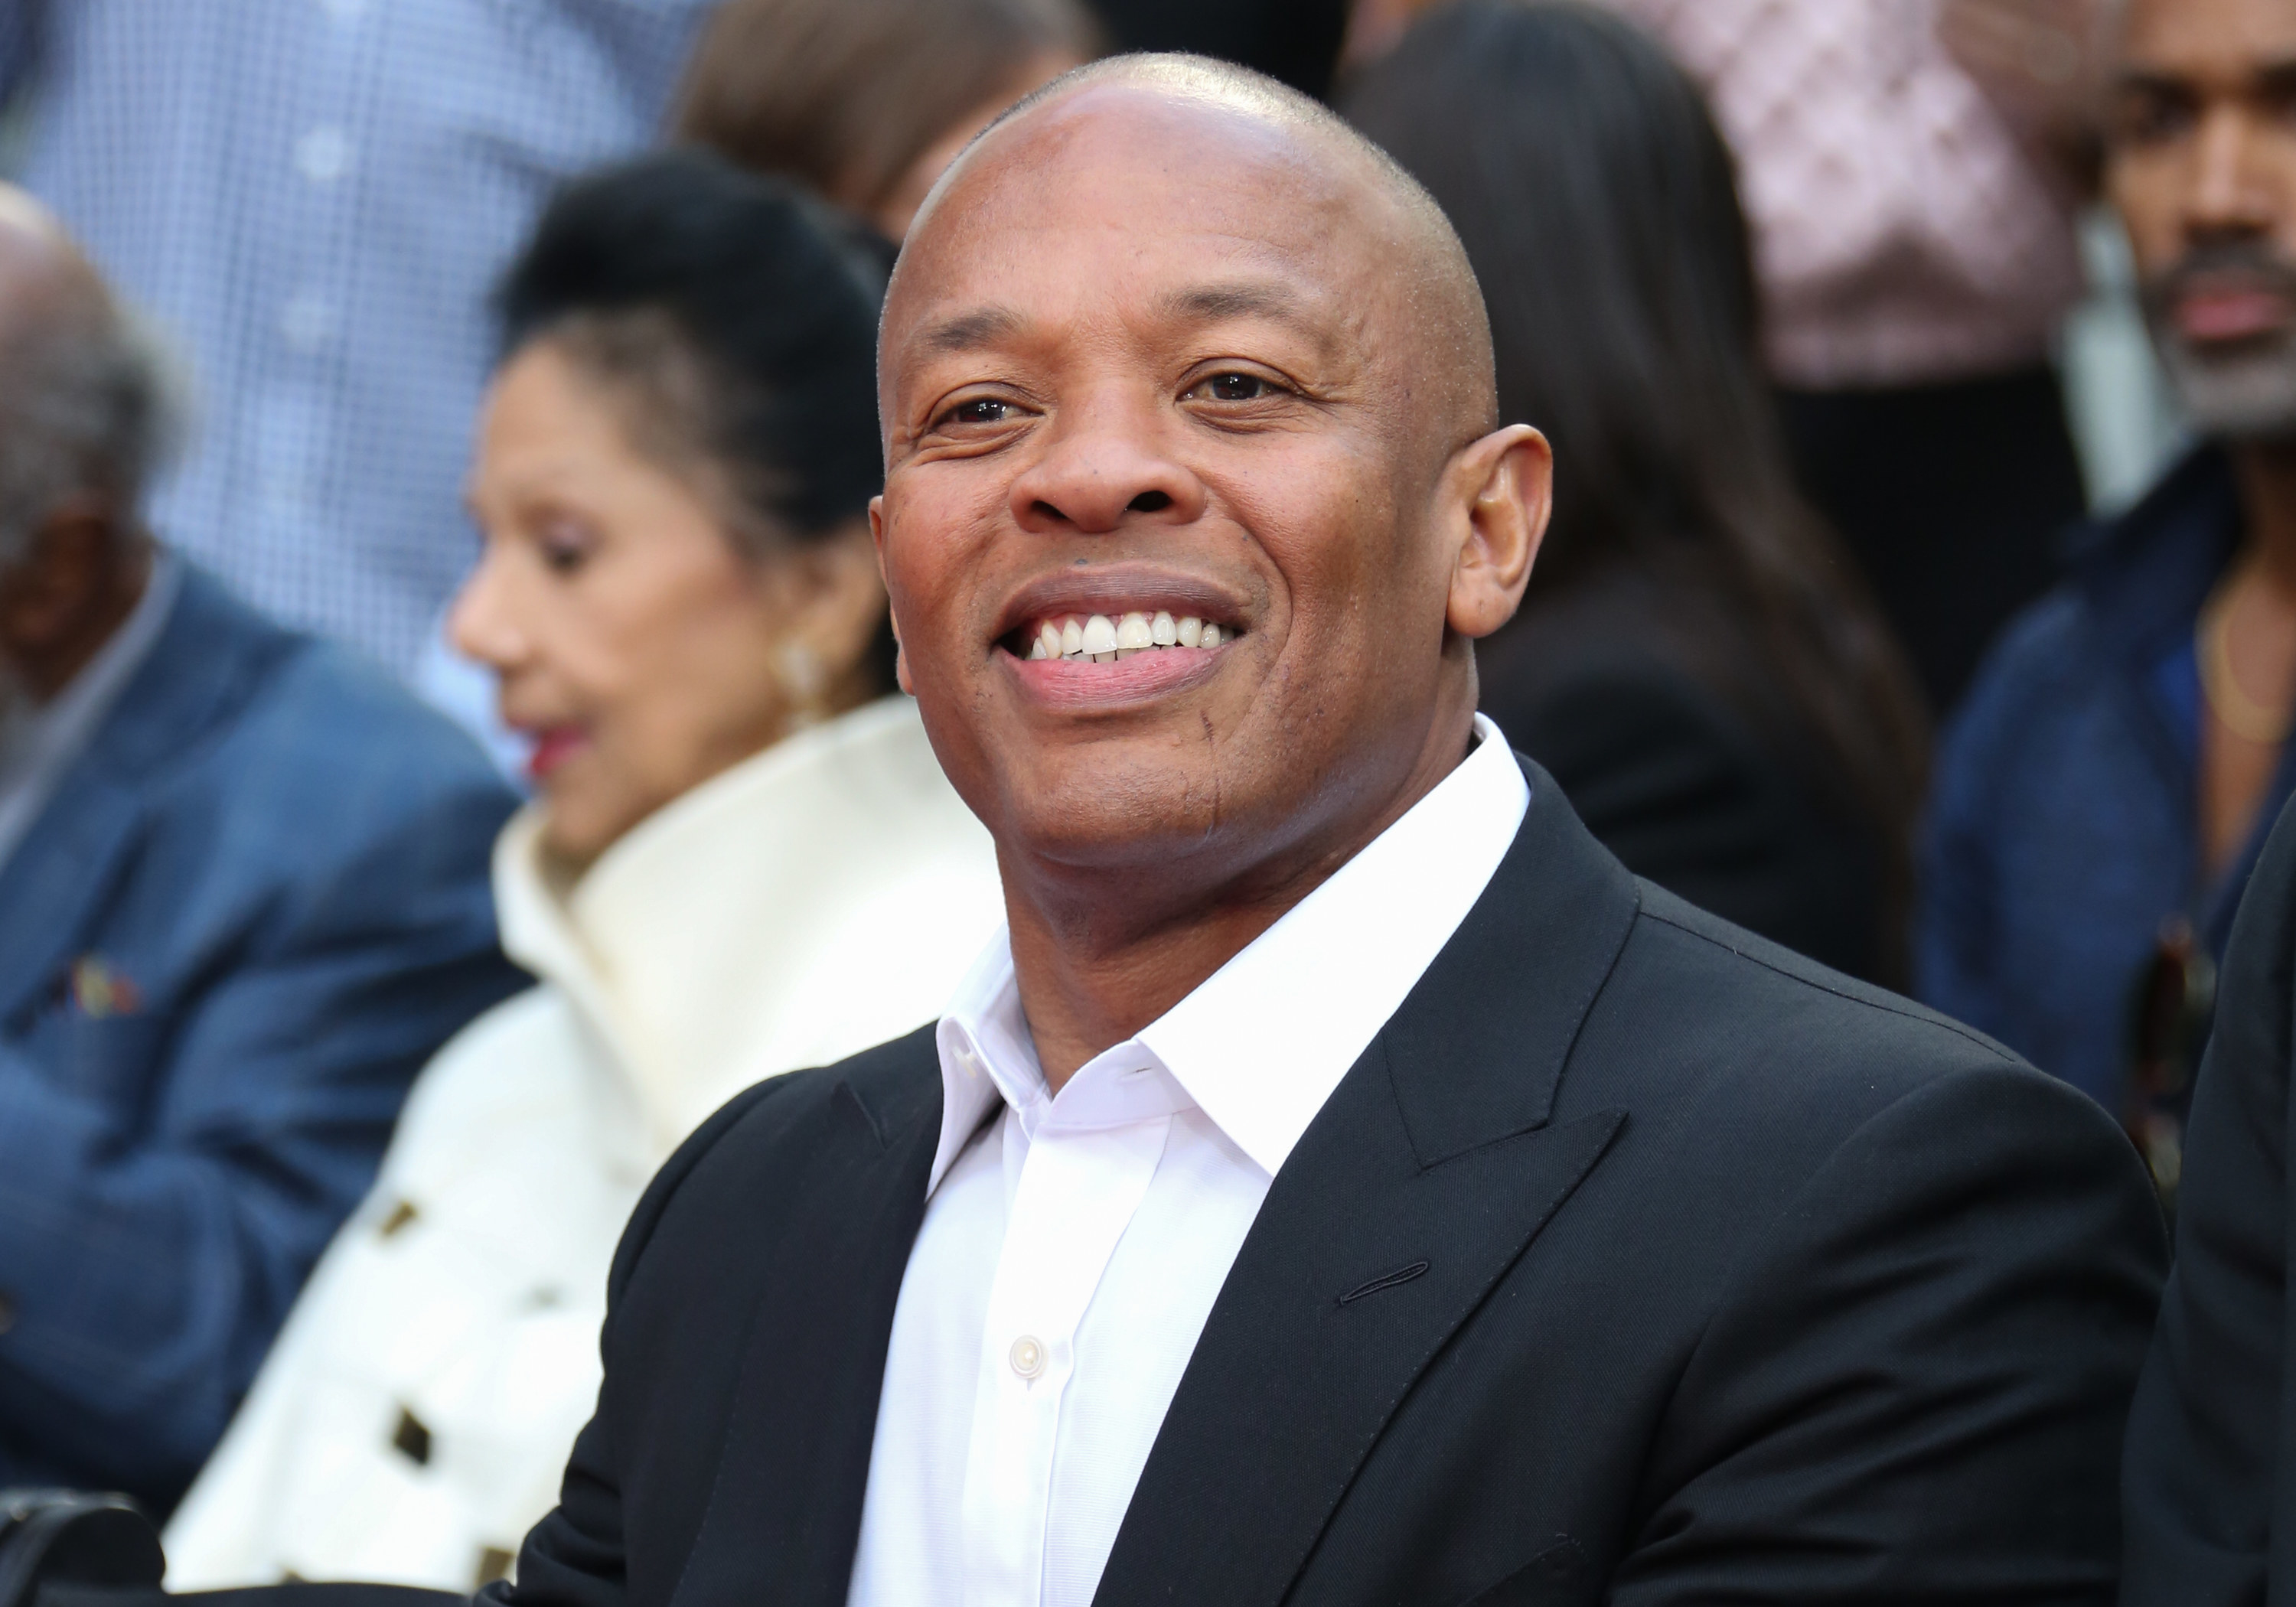 Dr. Dre attends the Quincy Jones Hand and Footprint ceremony at the TCL Chinese Theatre IMAX on November 27, 2018 in Hollywood, California